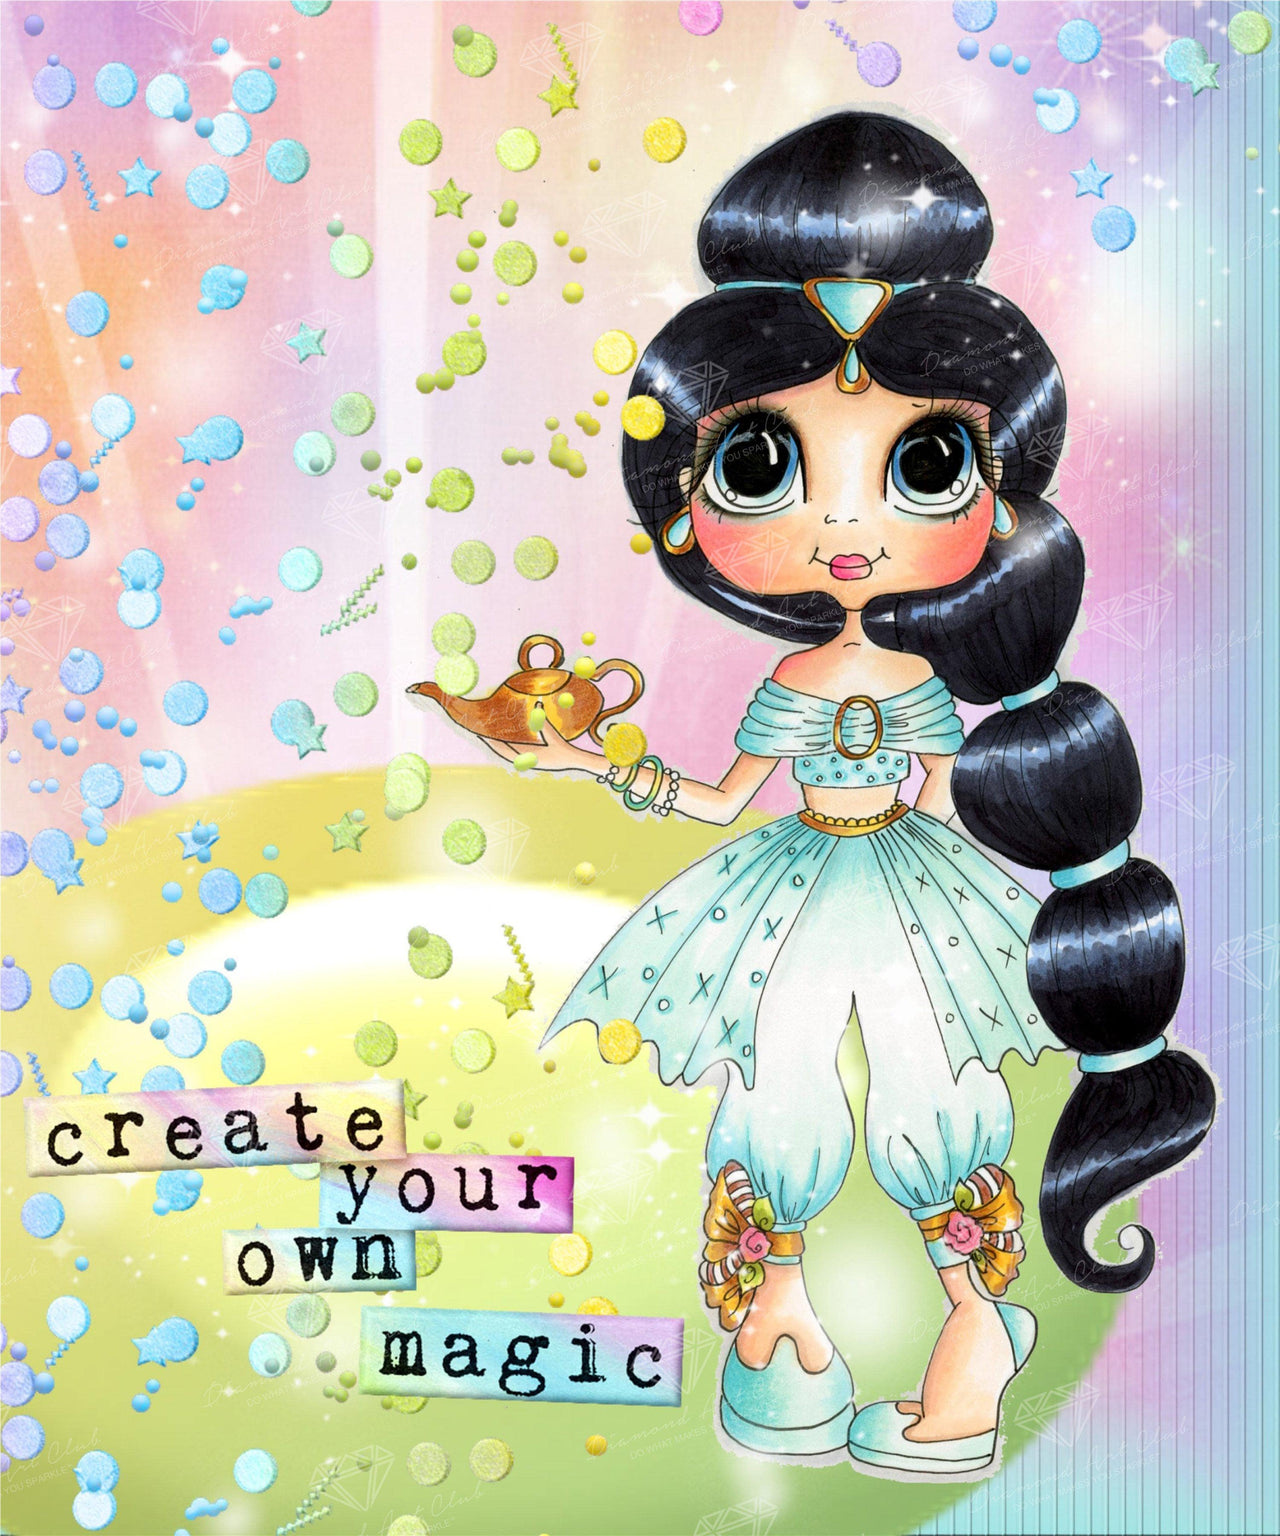 Diamond Painting Create Your Own Magic (final edition) 20" x 24″ (51cm x 61cm) / Round with 42 Colors including 2 ABs